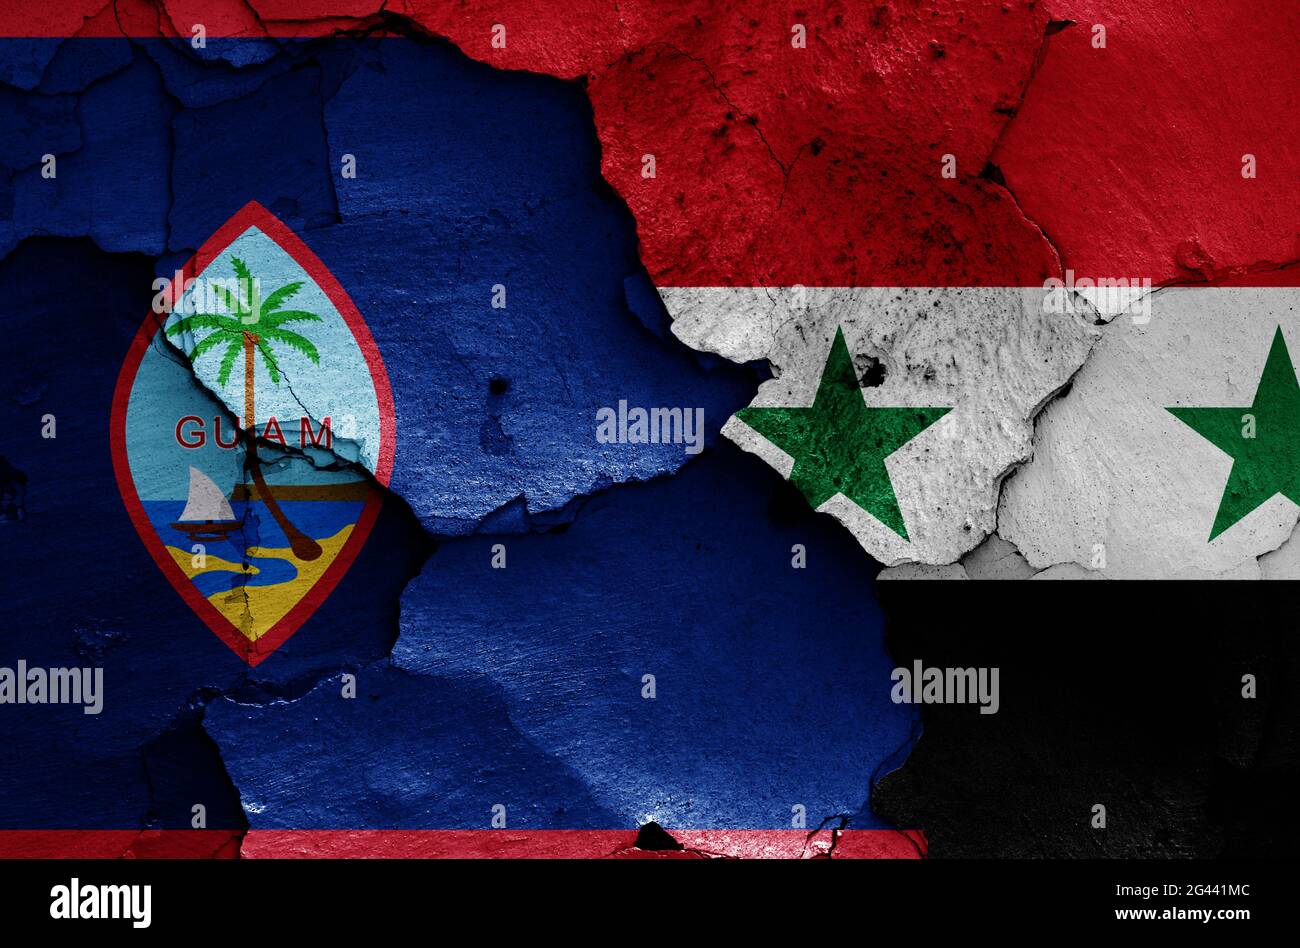 Flags of Guam and Syria painted on cracked wall Stock Photo